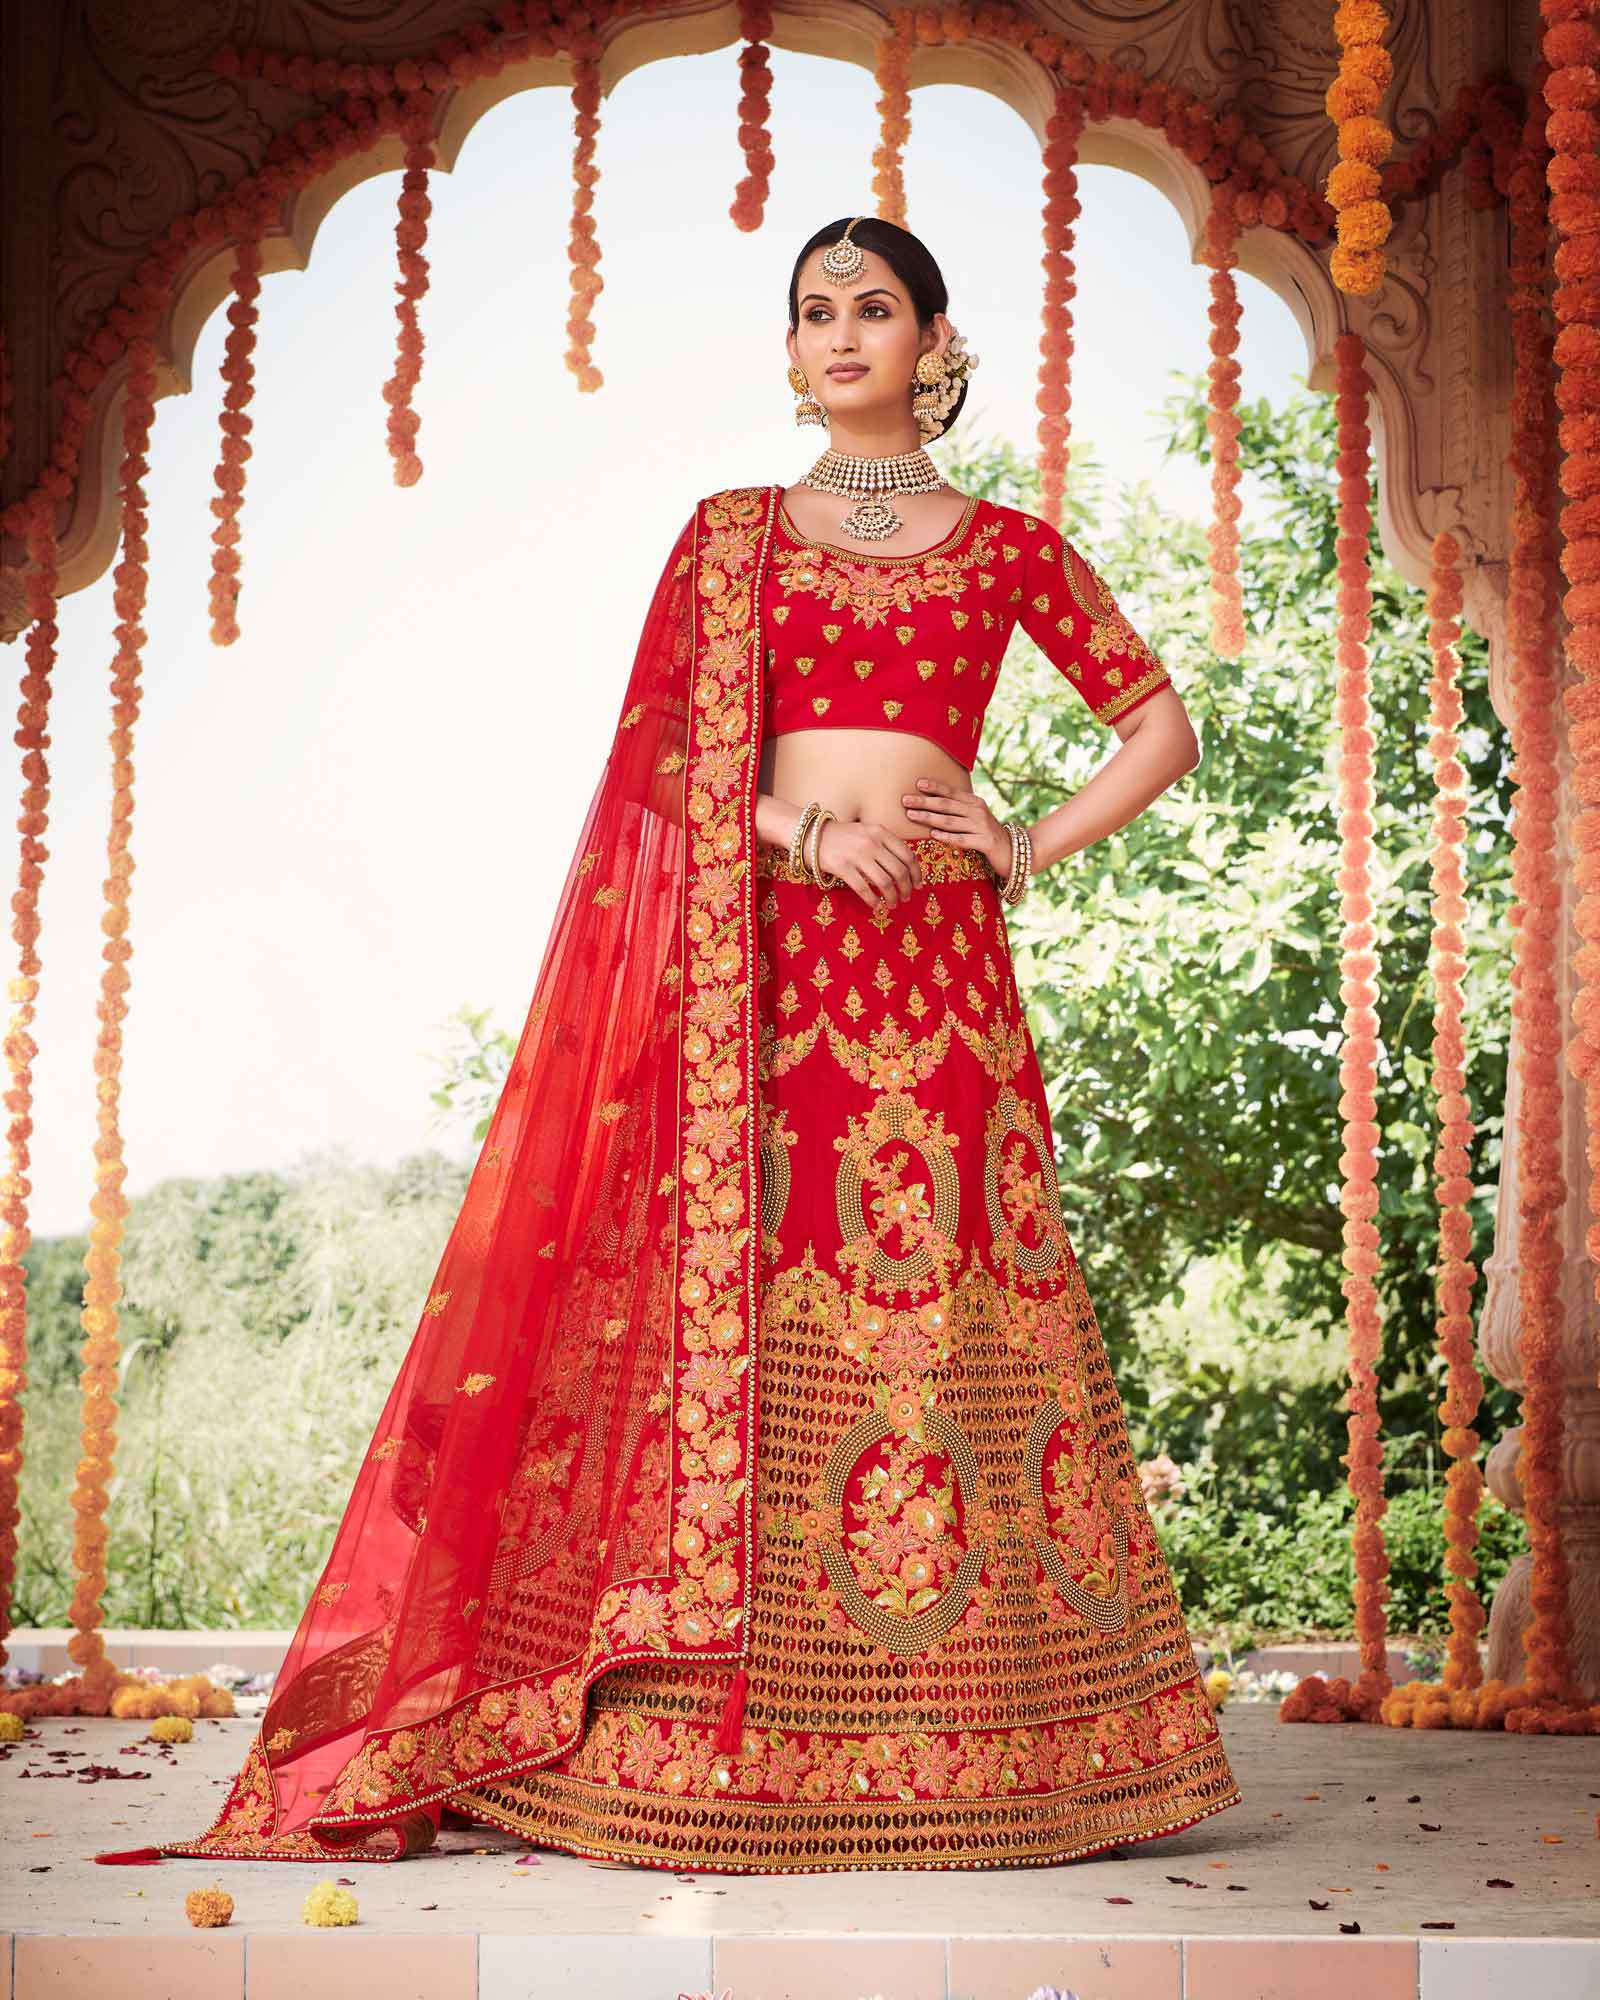 Rose Red Silk Bridal Lehenga Choli With Heavy Thread Embroidery And Stone Work